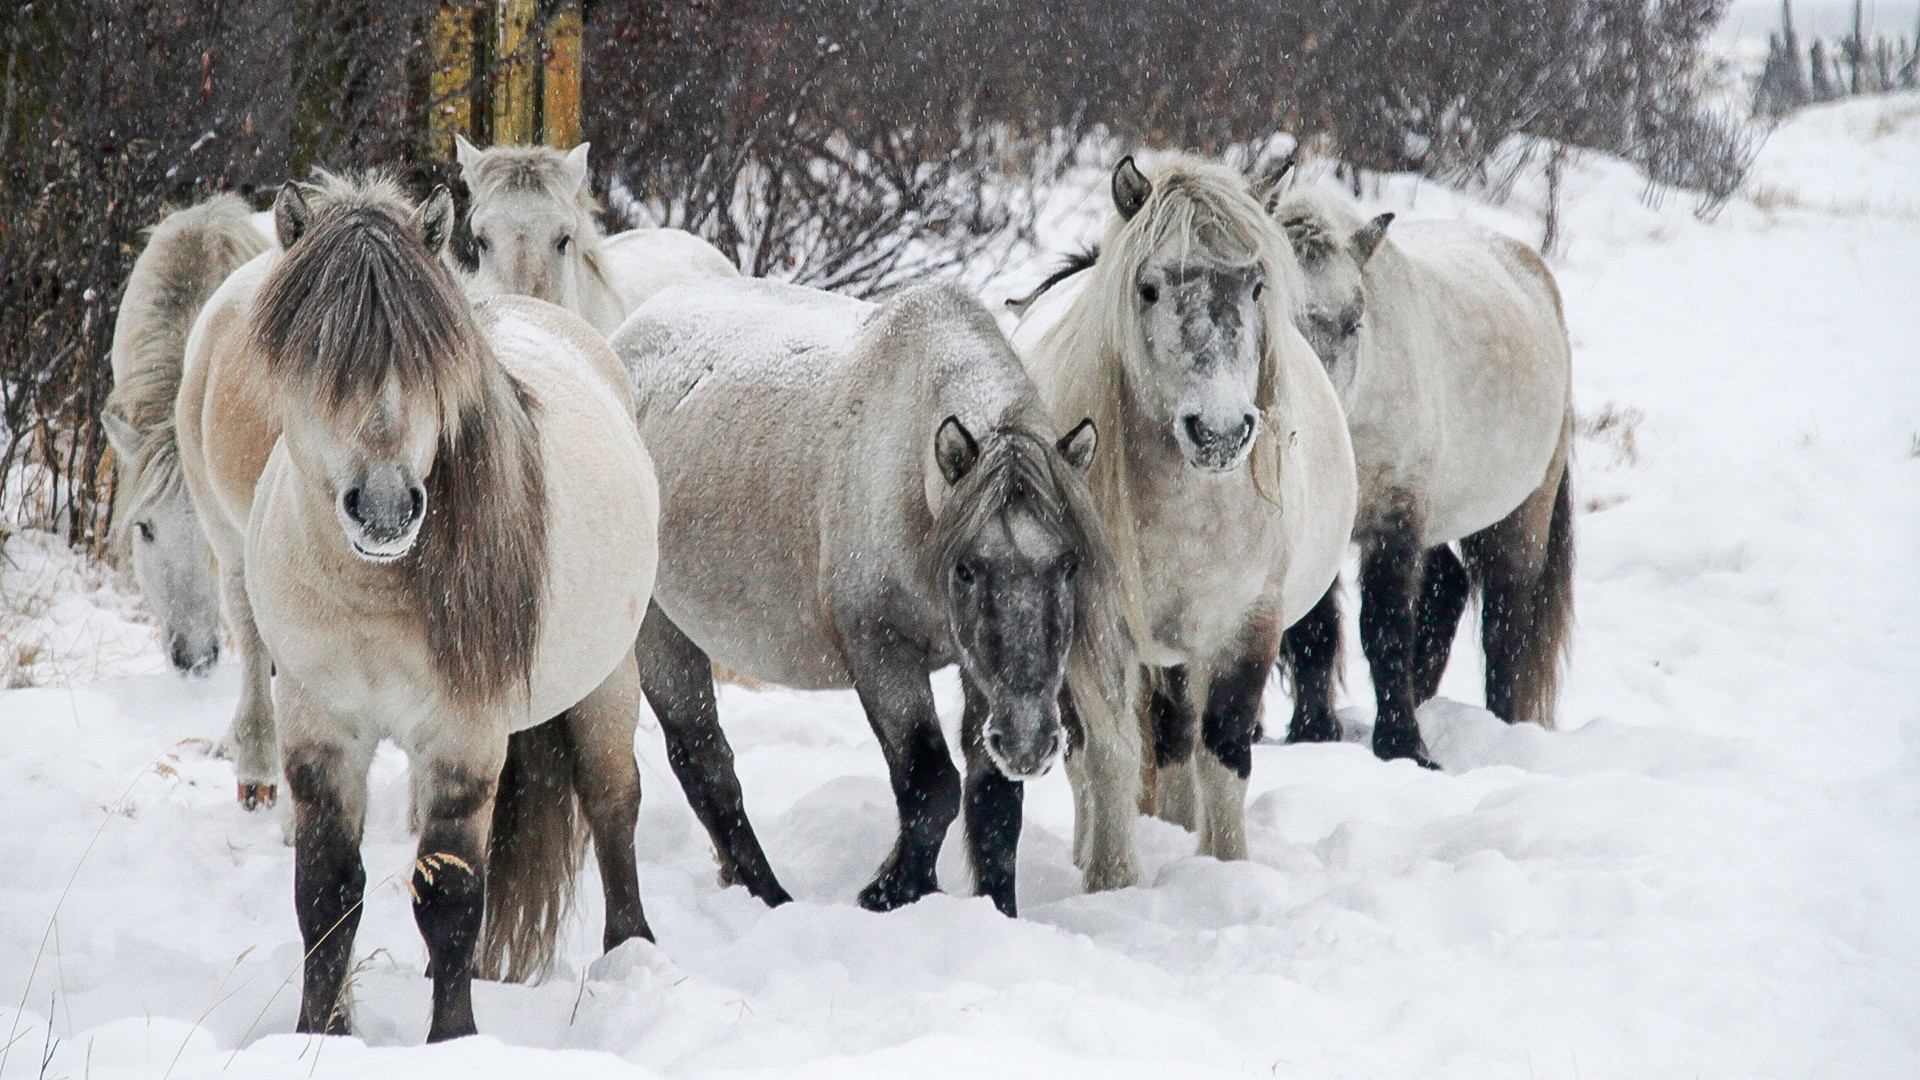 Yakut horses were the first animals that were brought to the Pleistocene Park.